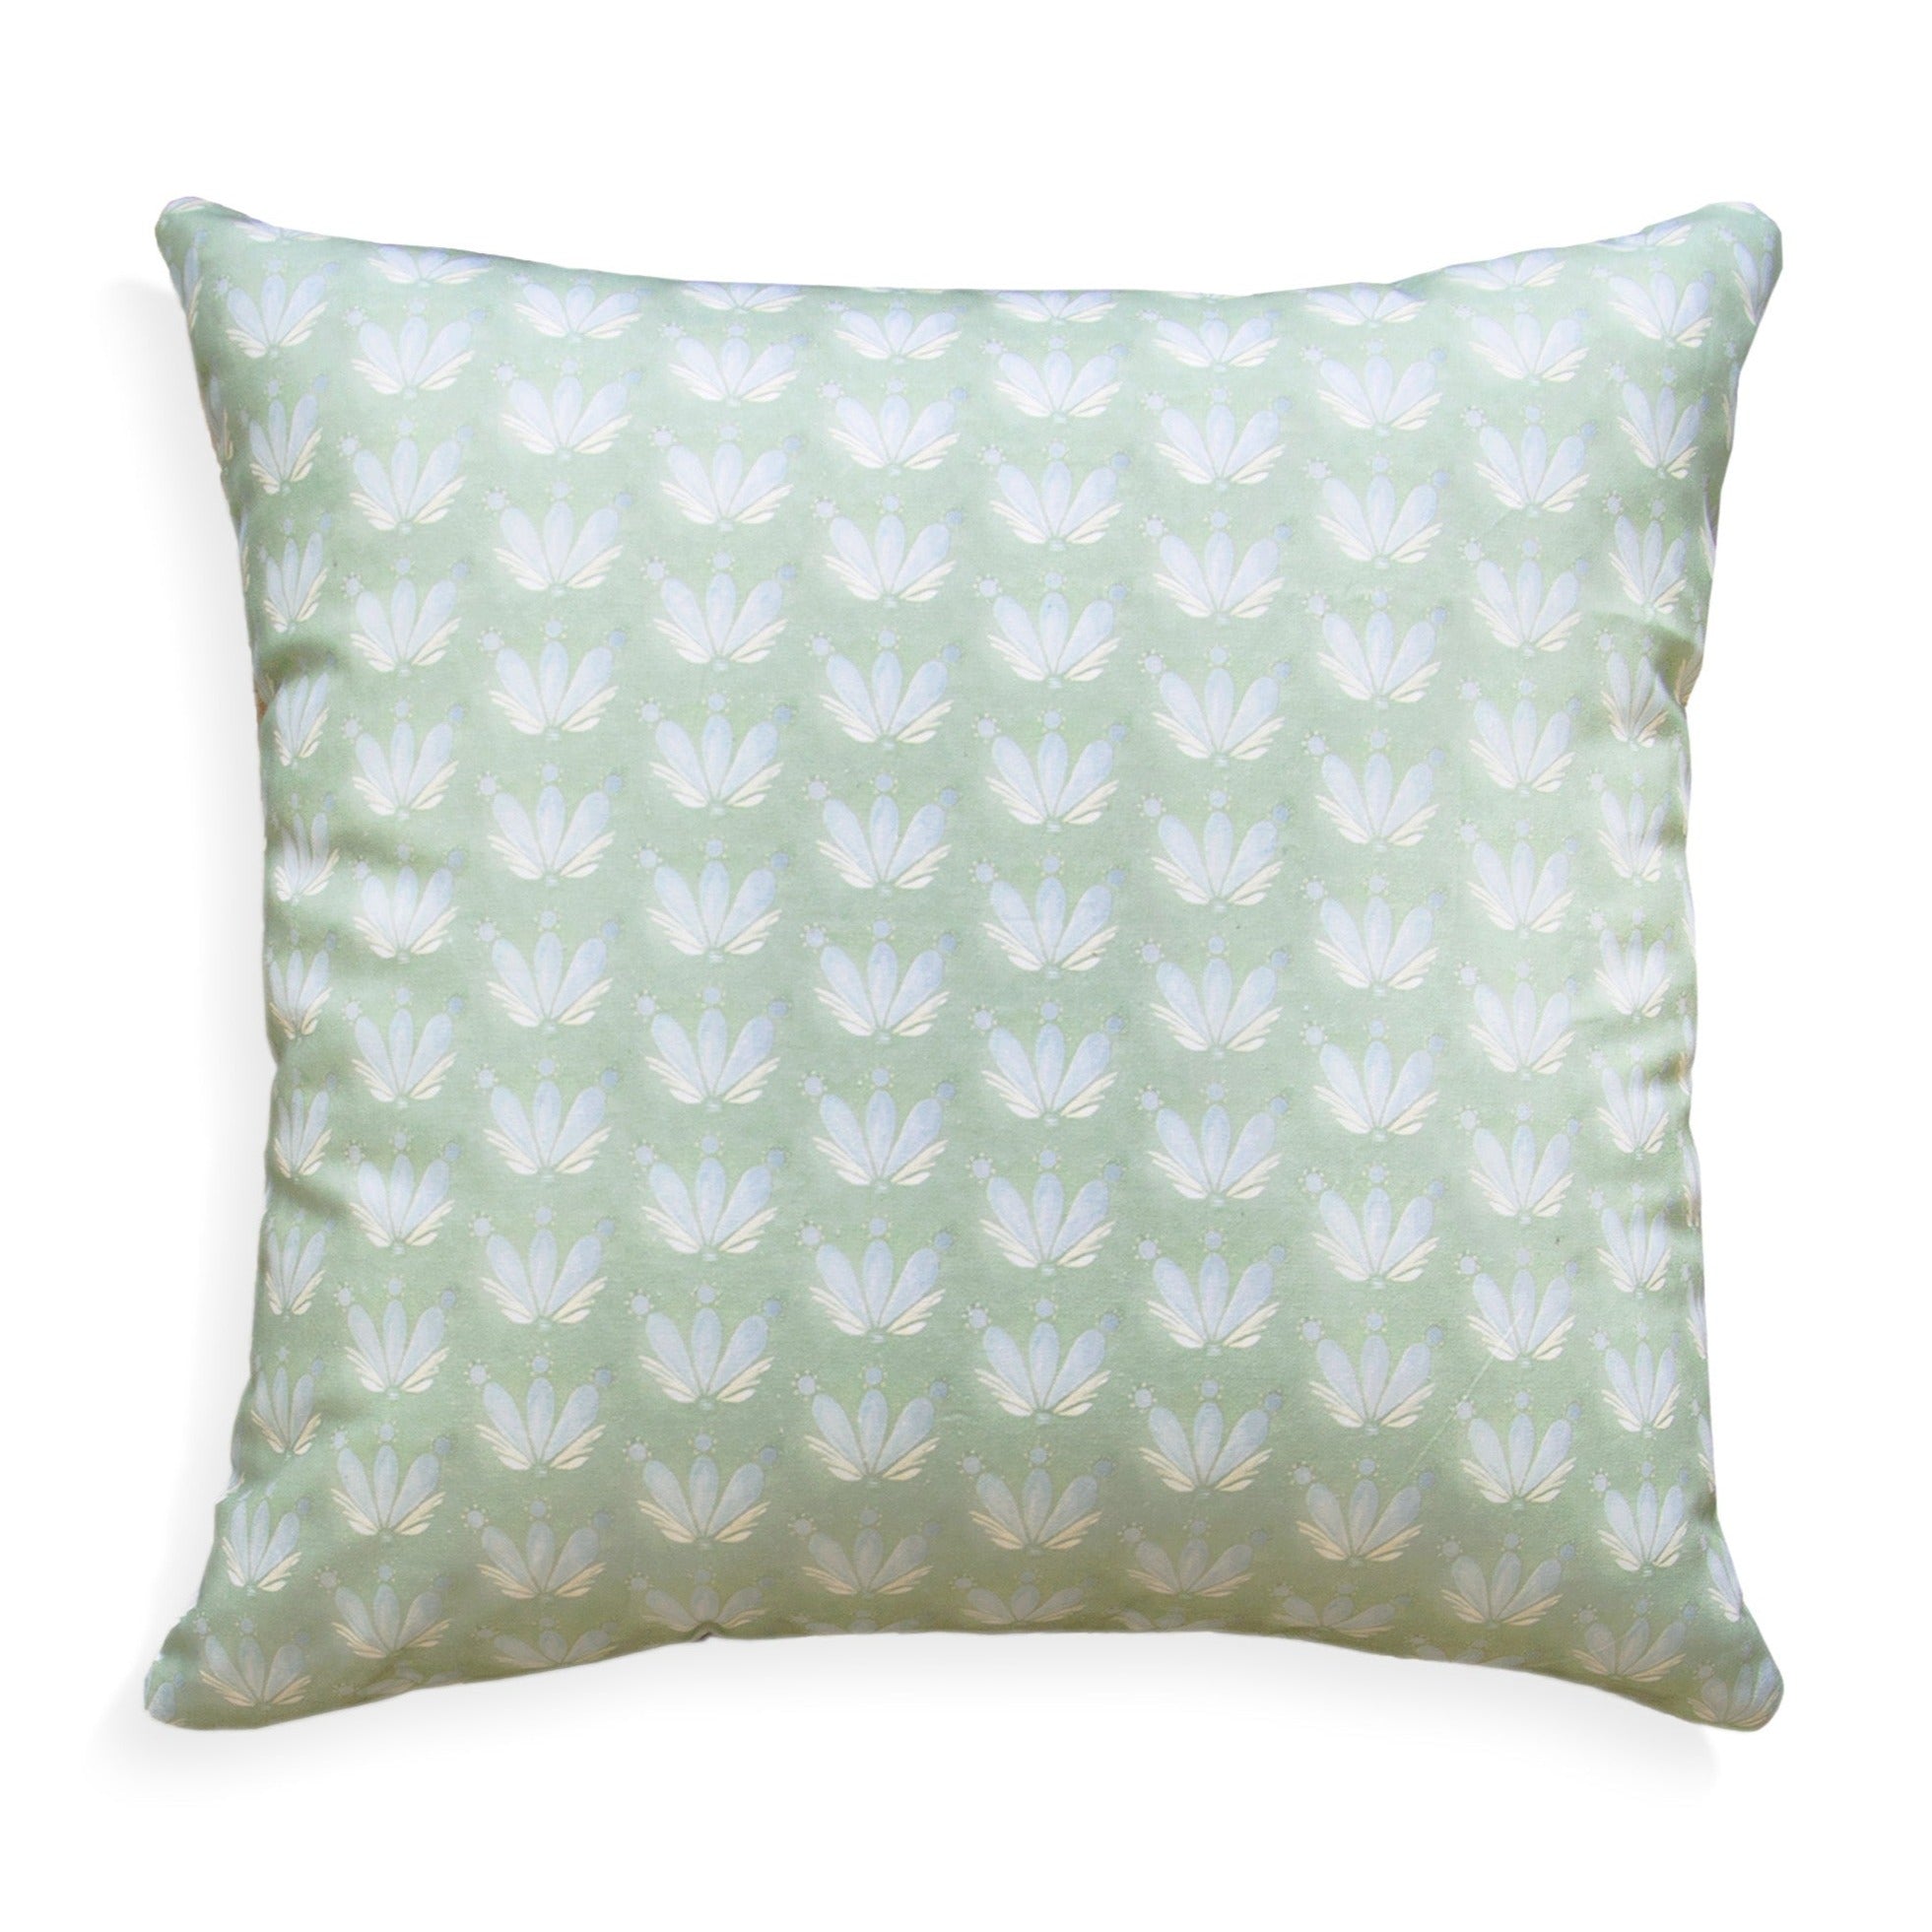 The best 12 throw pillows to make your home feel elegant | Livingetc